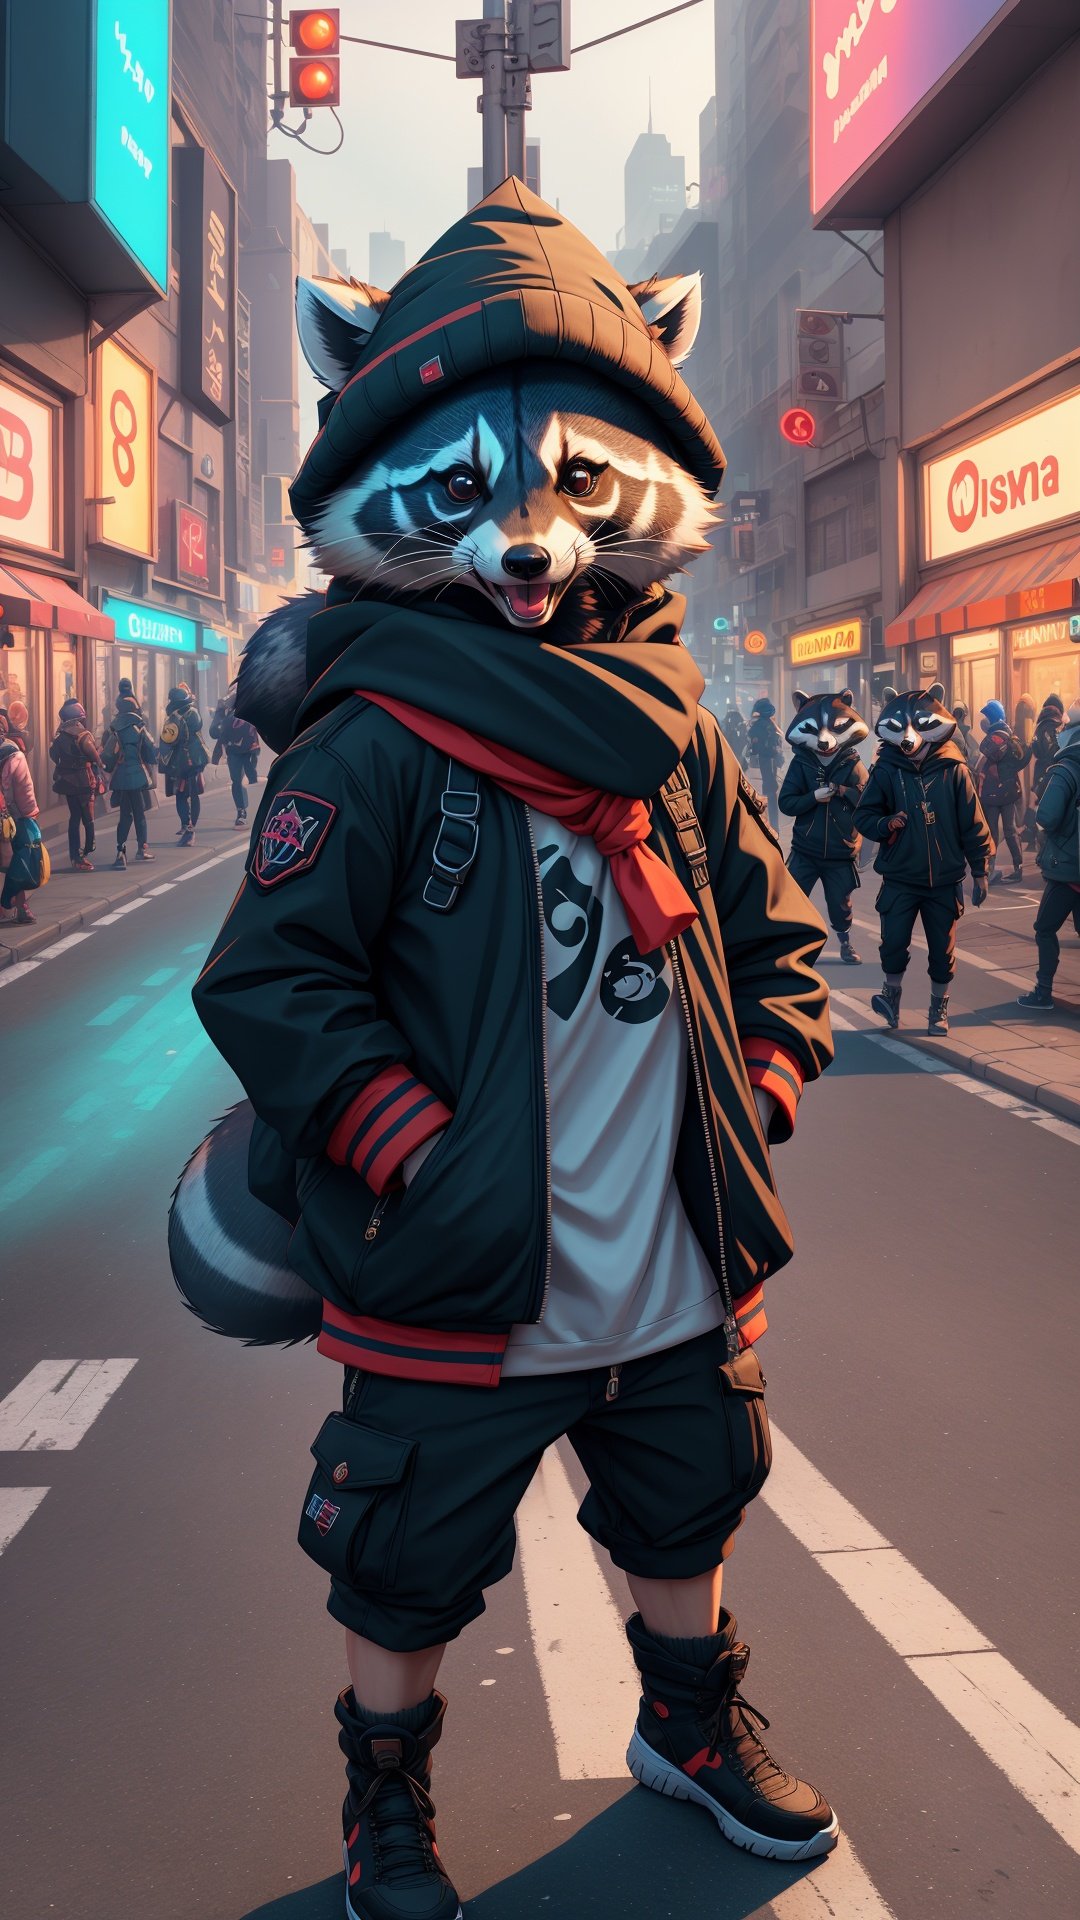 (best quality,highres), 3D video game raccoon wearing a bandana on his head, demands money, vibrant colors, detailed fur, intense expression, dynamic pose, urban street backdrop, digital art, neon lights, game character, mischievous vibe